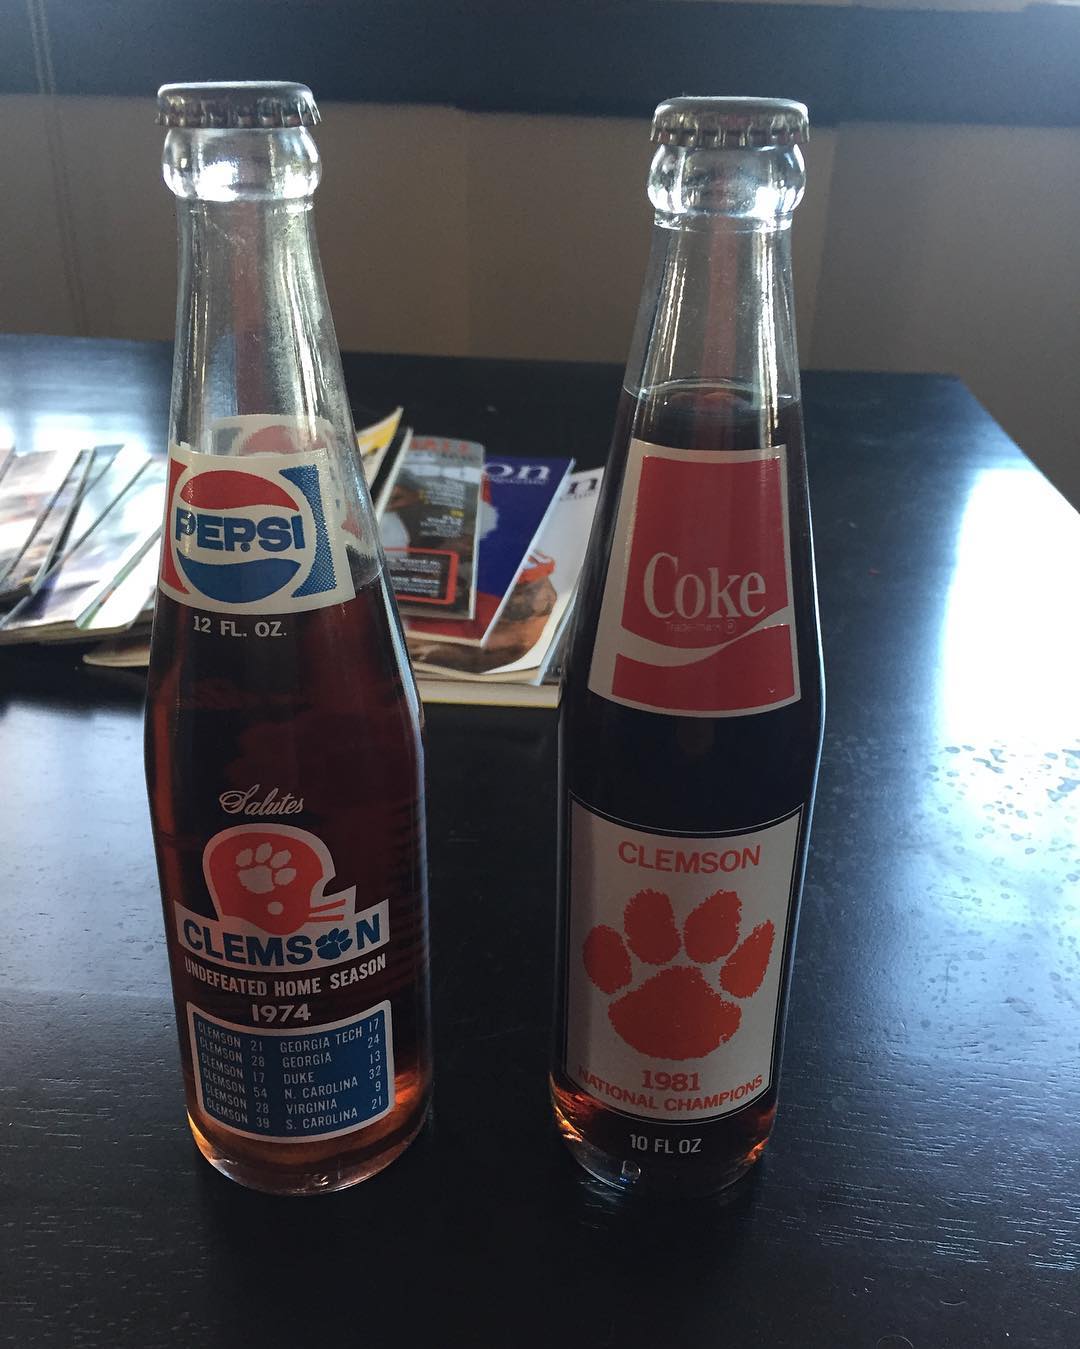 If anyone finds out if Coke is going to make a bottle for this year's #Natty ... let me know! I want one for my collection!!! #GoTigers